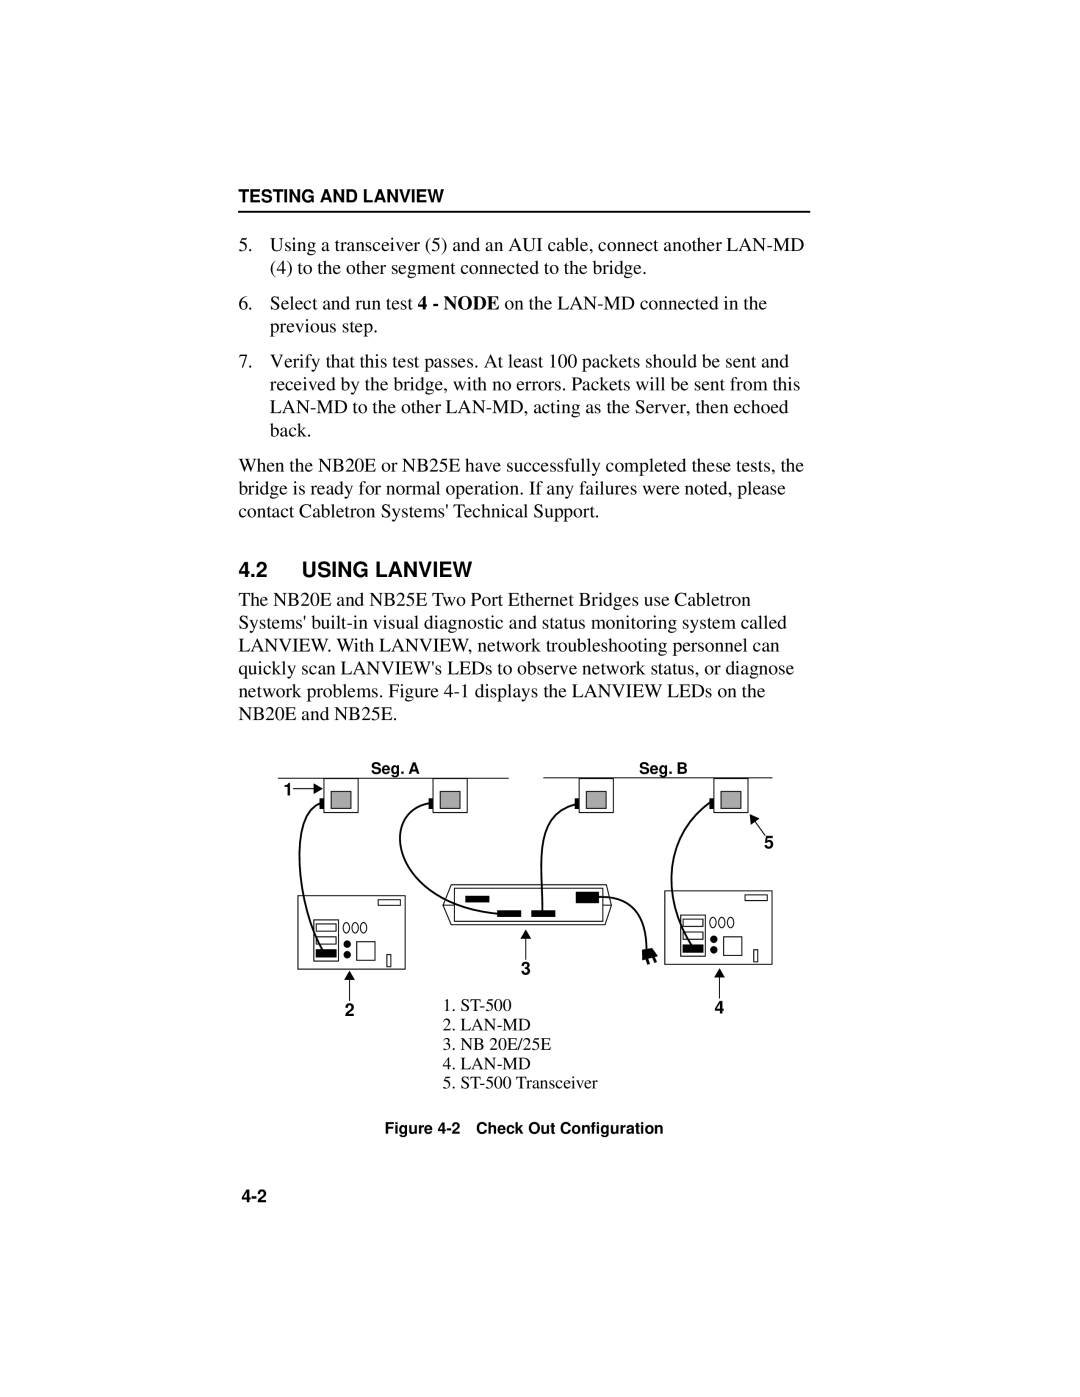 Cabletron Systems NB20E, NB25 E user manual Using Lanview 